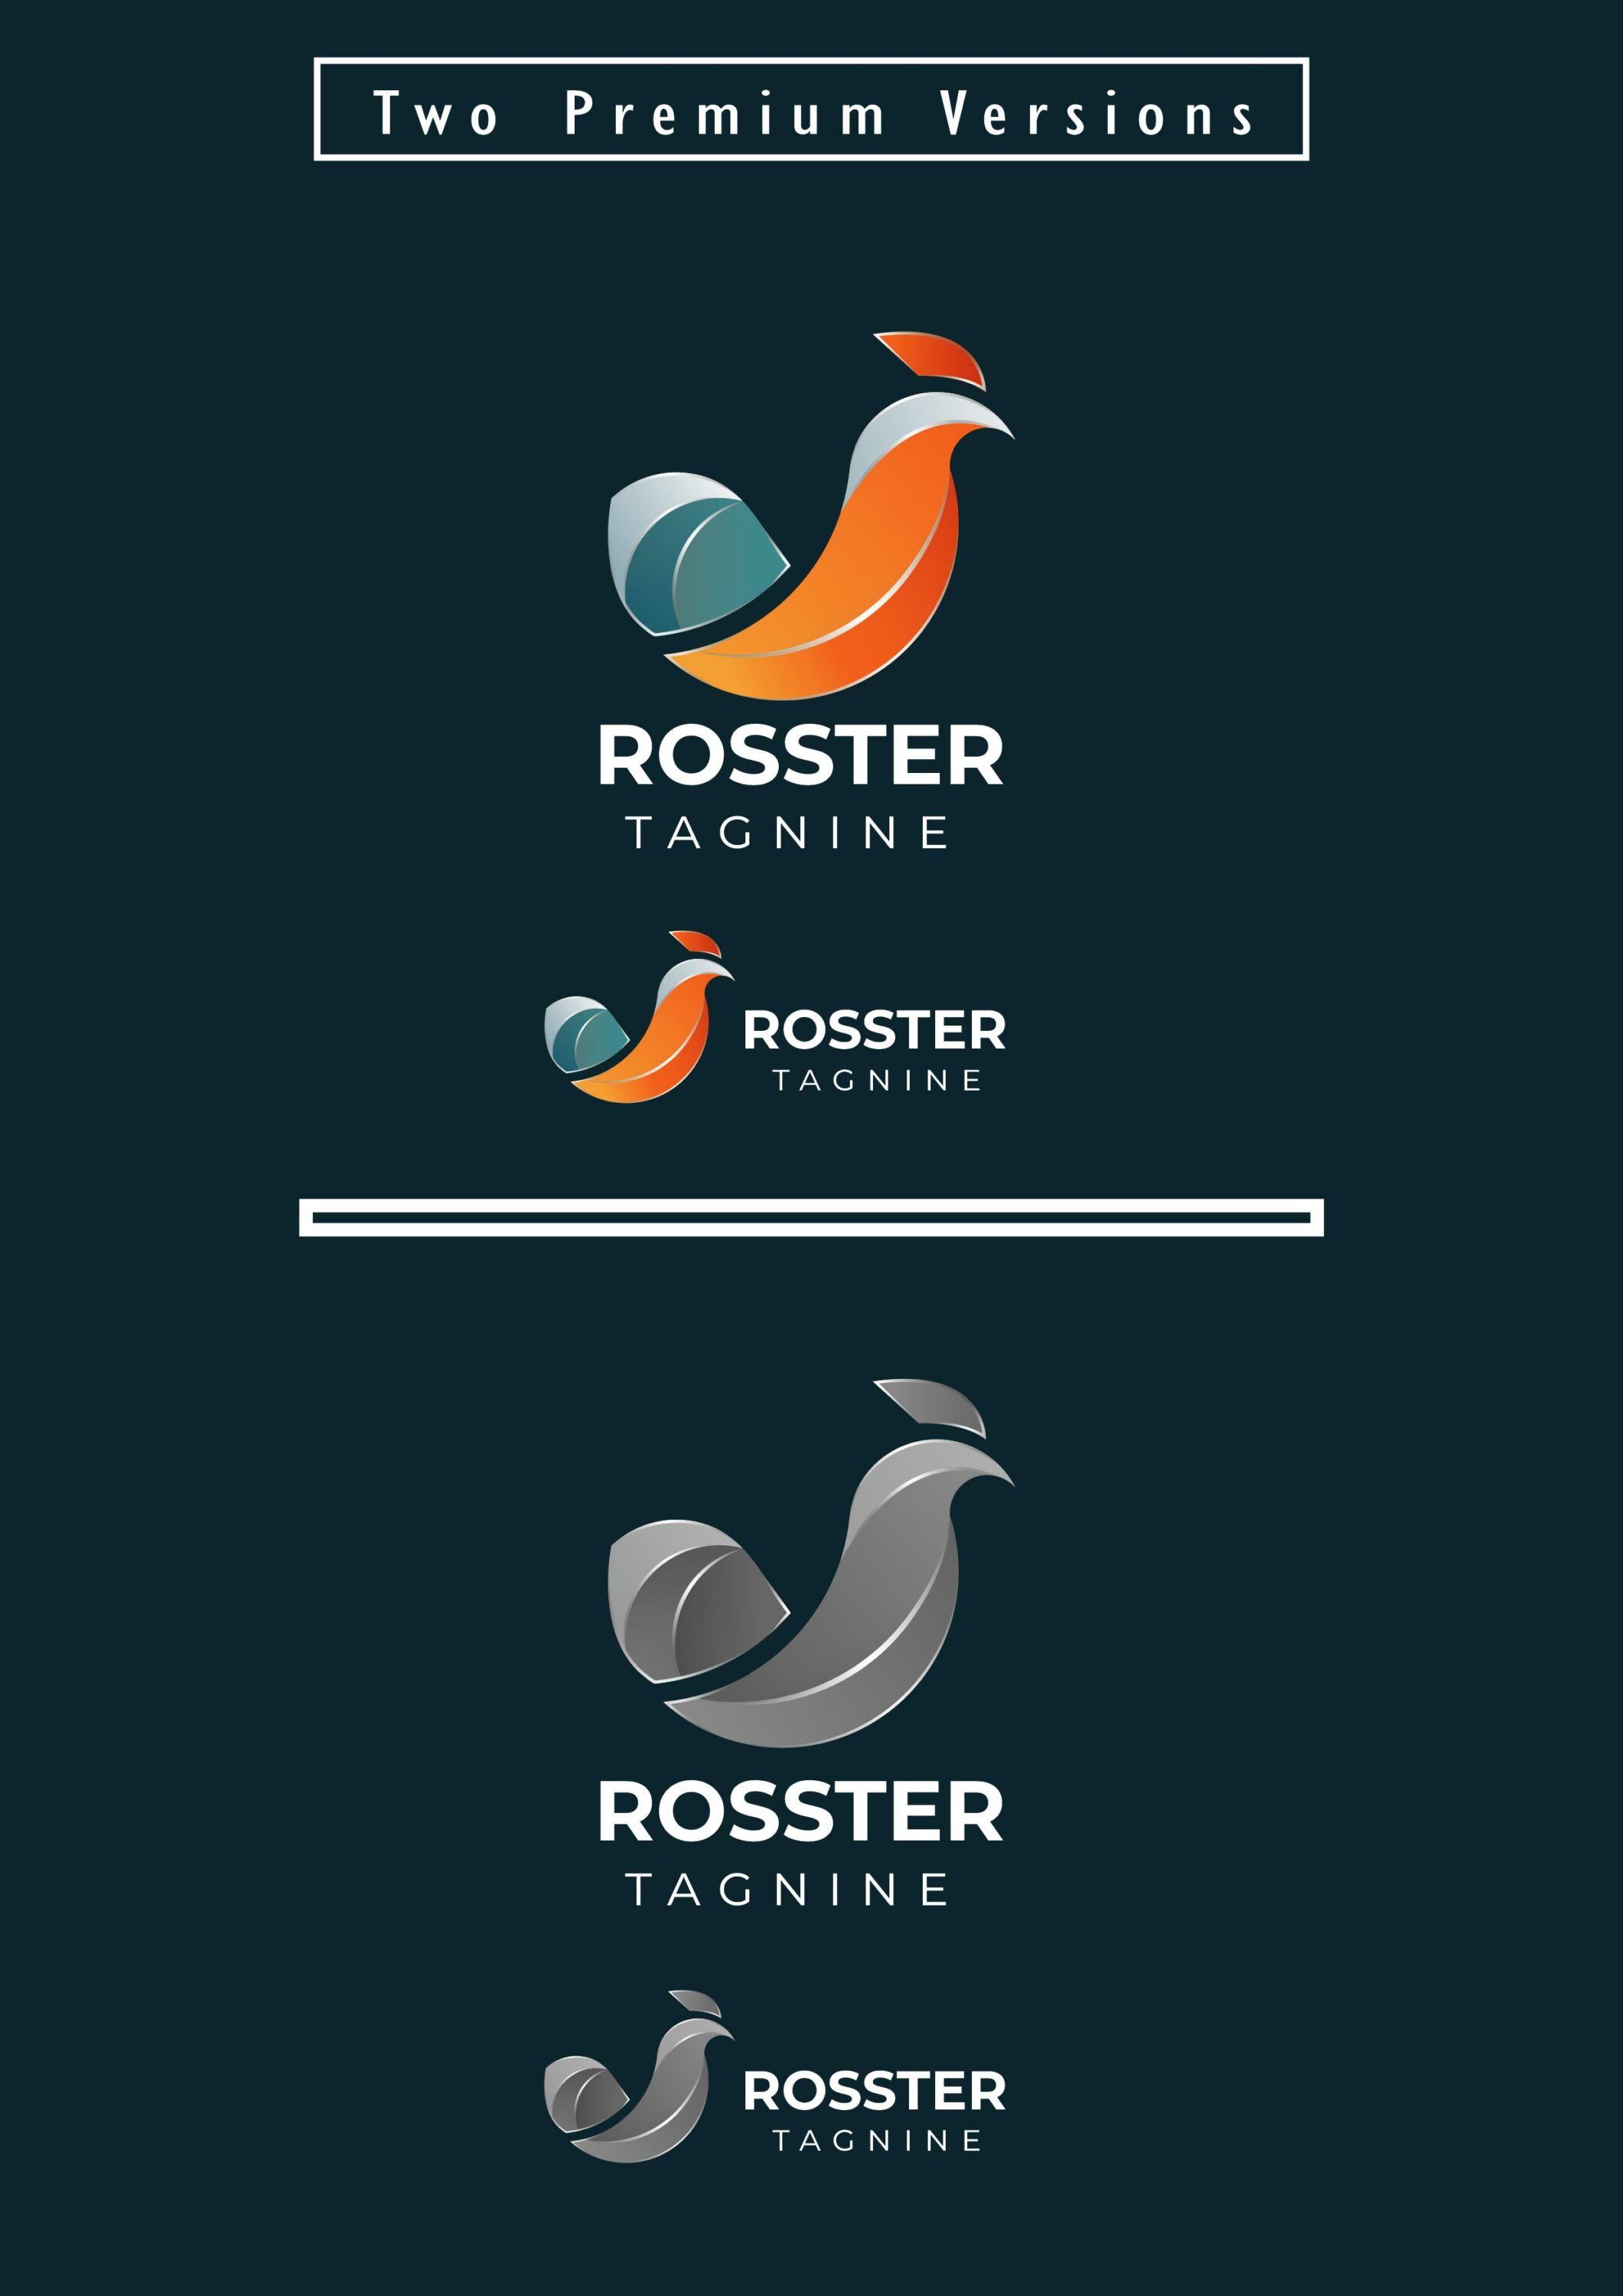 chicken logoChicken Gradient Colorful Style Rooster logo Design For Your Brand pinterest.